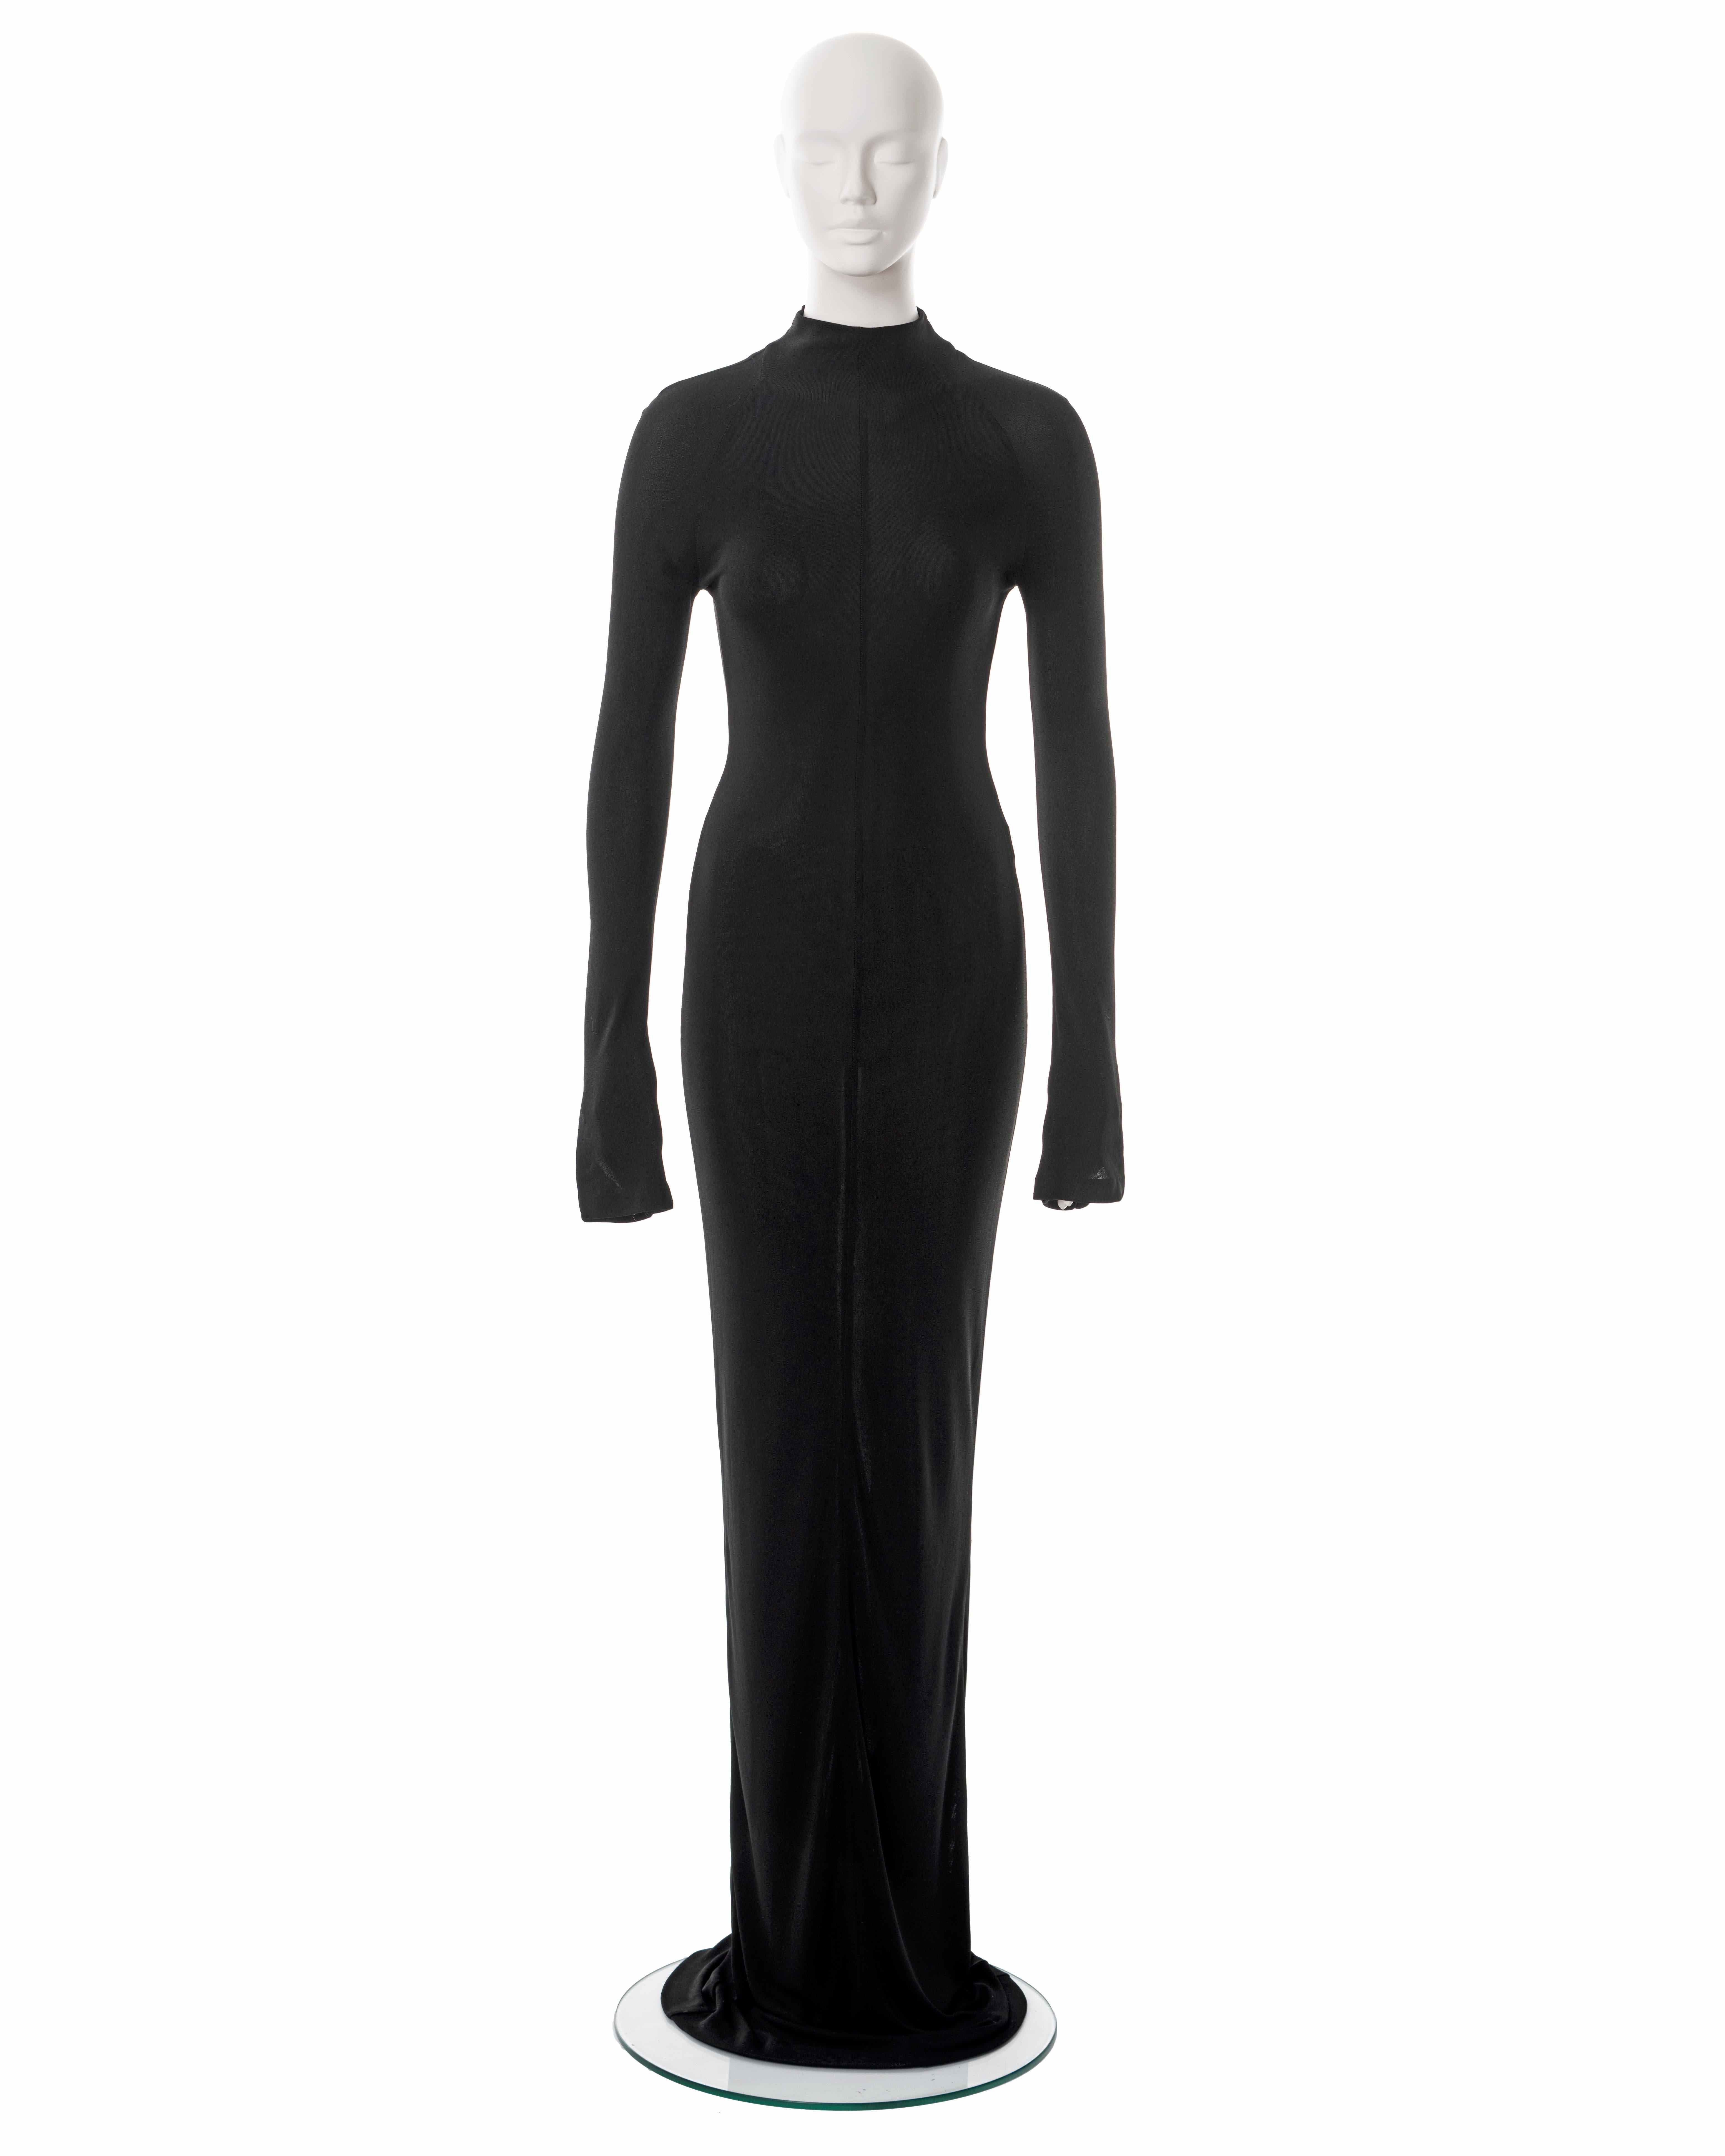 ▪ Gucci black rayon jersey evening maxi dress
▪ Designed by Tom Ford
▪ Sold by One of a Kind Archive
▪ Spring-Summer 1998
▪ Body-conscious fit 
▪ Extra long sleeves with slits at the cuff
▪ Mock neck 
▪ Concealed centre-back zipper 
▪ Extra Long